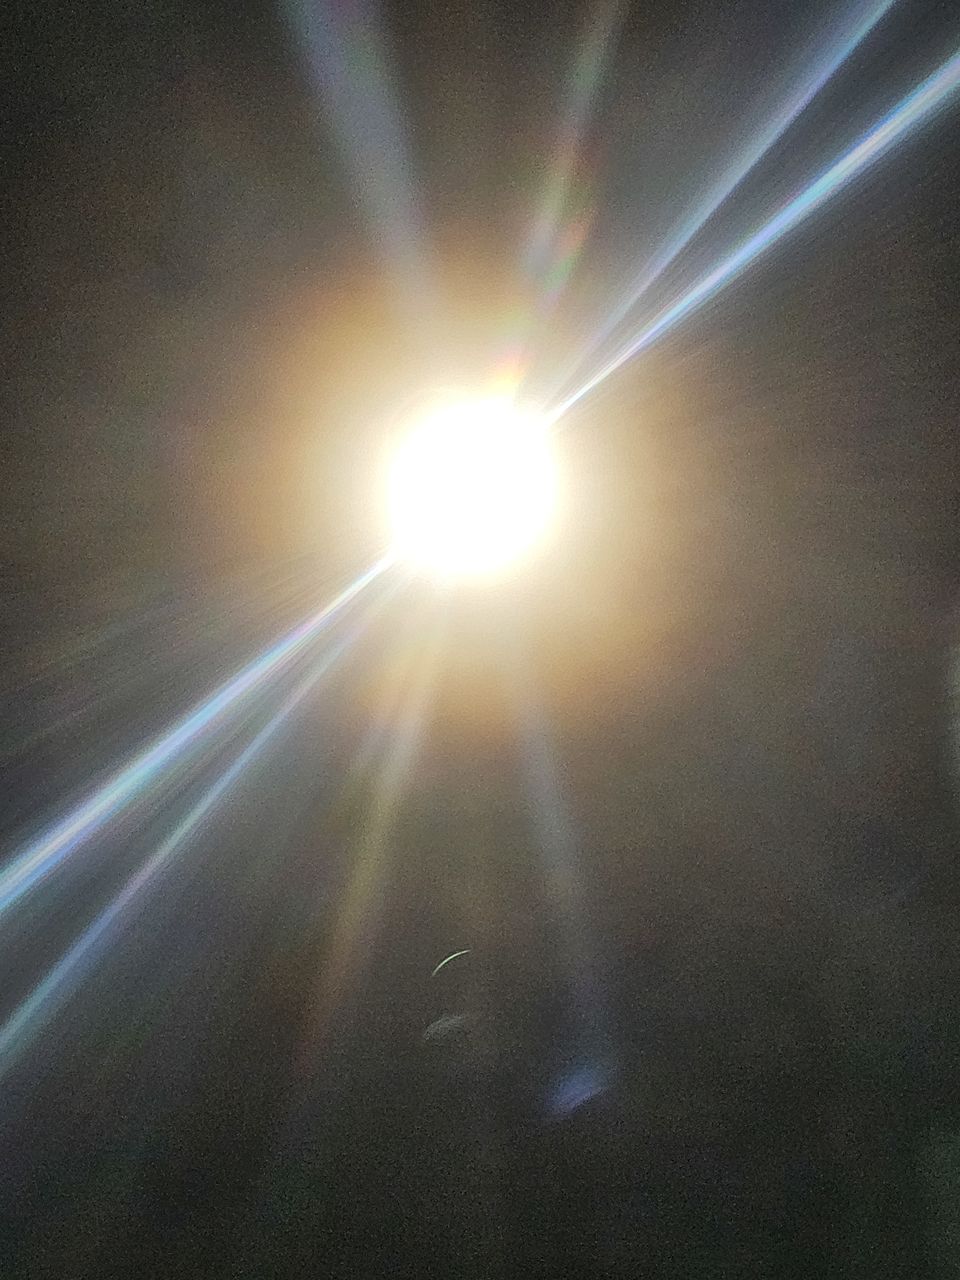 light, sunlight, lens flare, sunbeam, sun, sky, astronomical object, nature, no people, line, darkness, light - natural phenomenon, circle, beauty in nature, illuminated, outdoors, bright, light beam, glowing